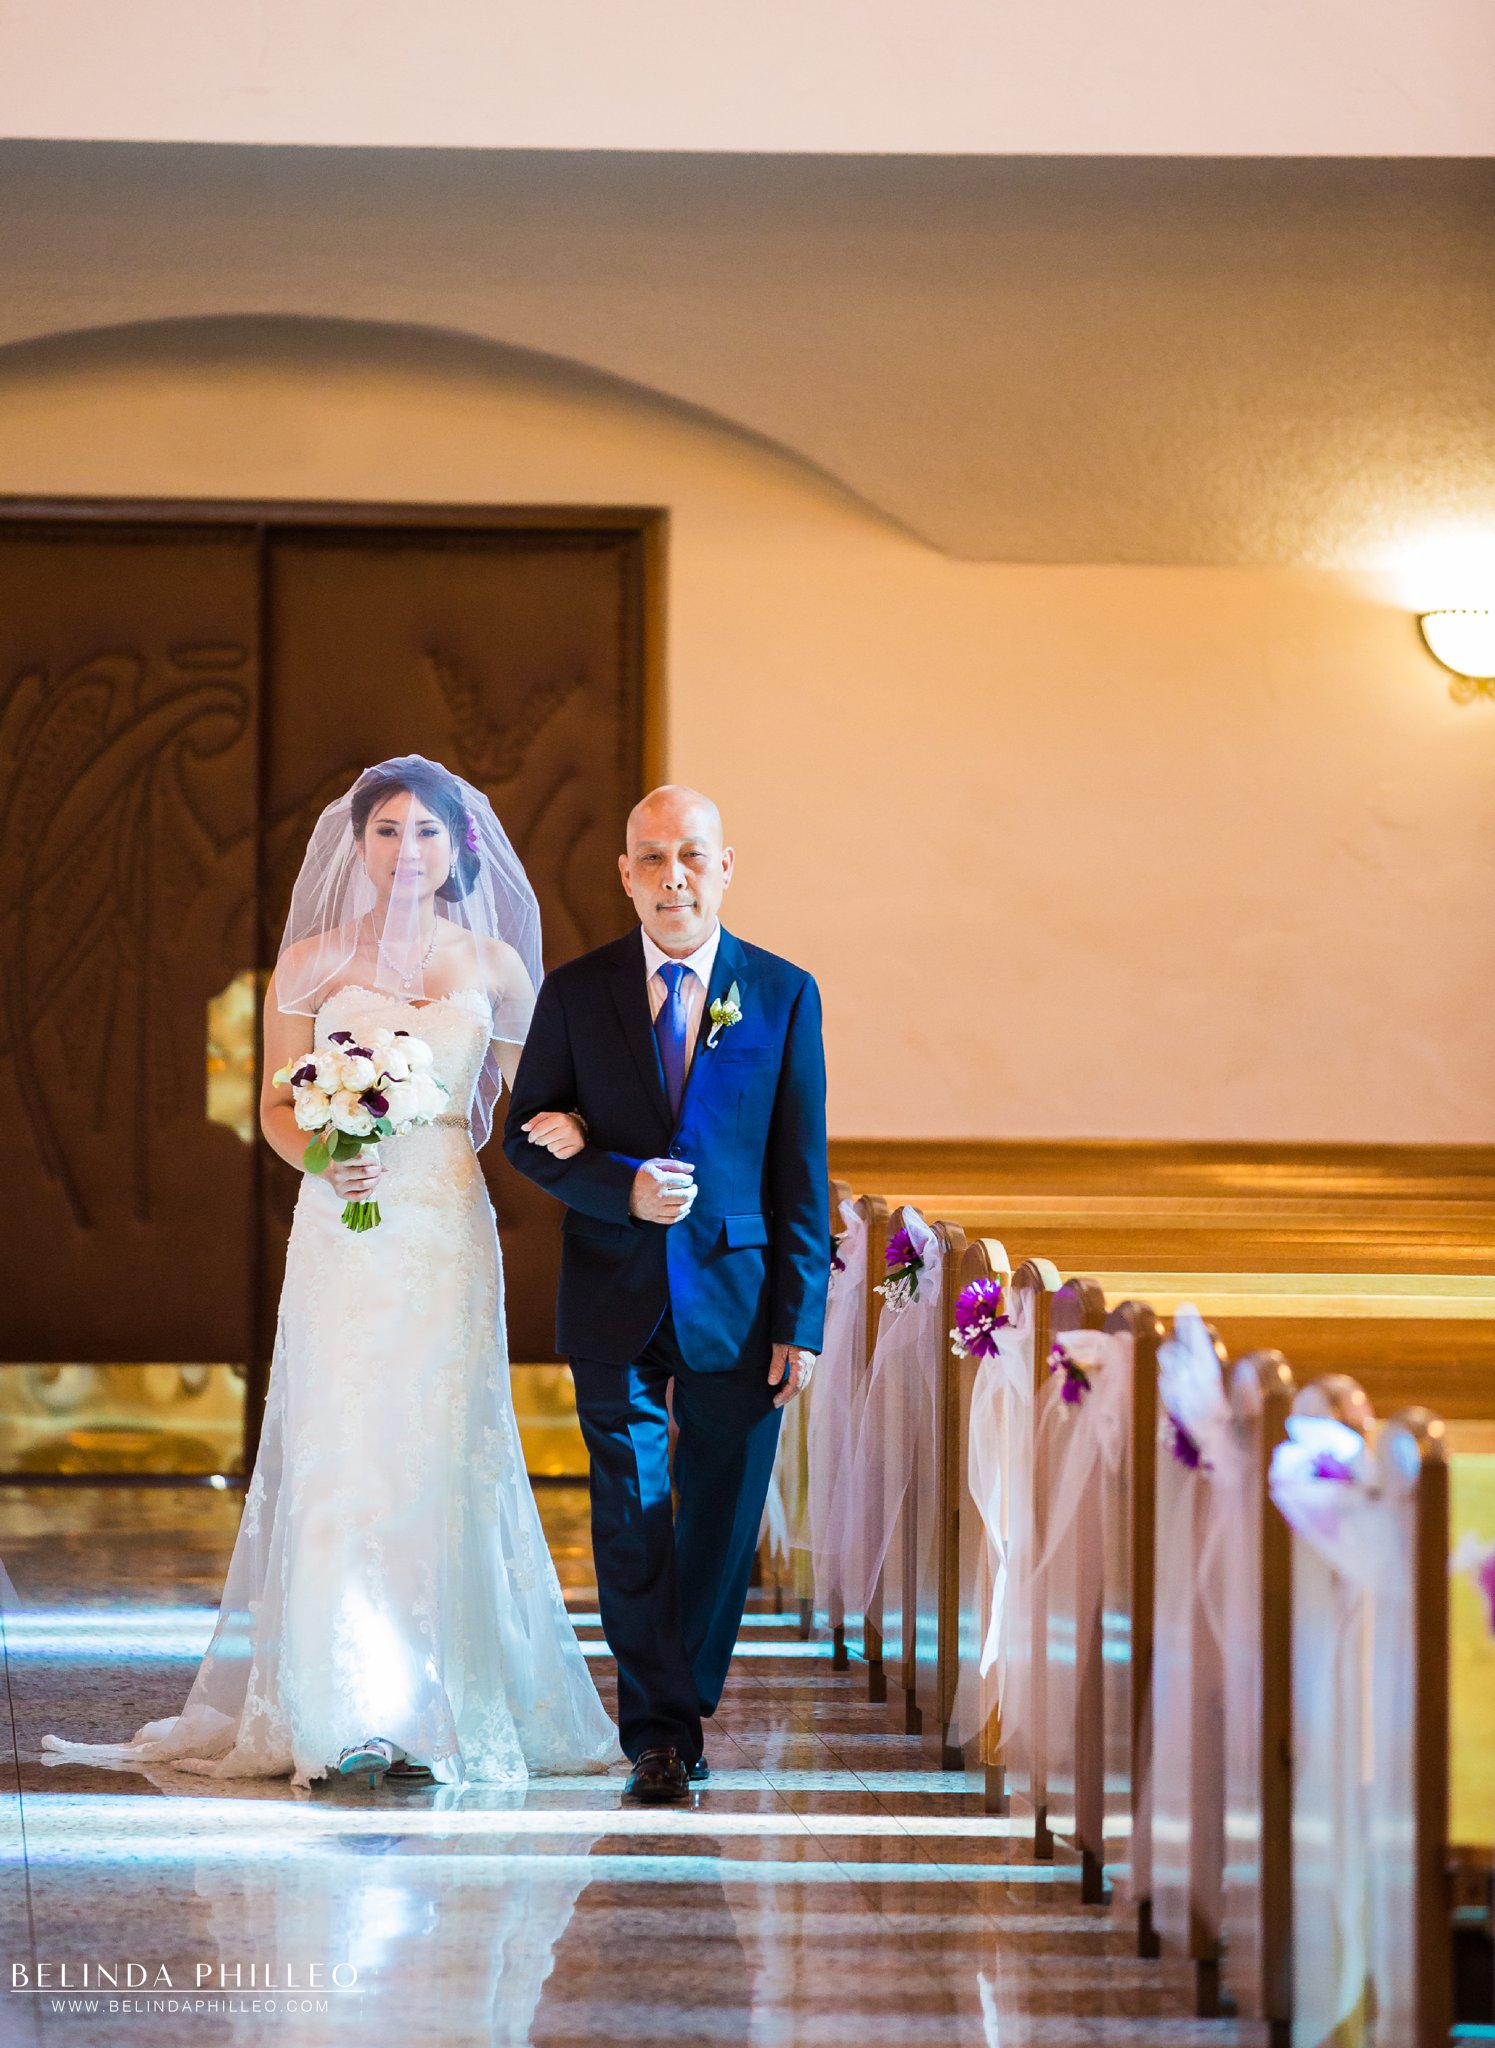 Bride is escorted down the aisle by her father at the San Gabriel Mission & church